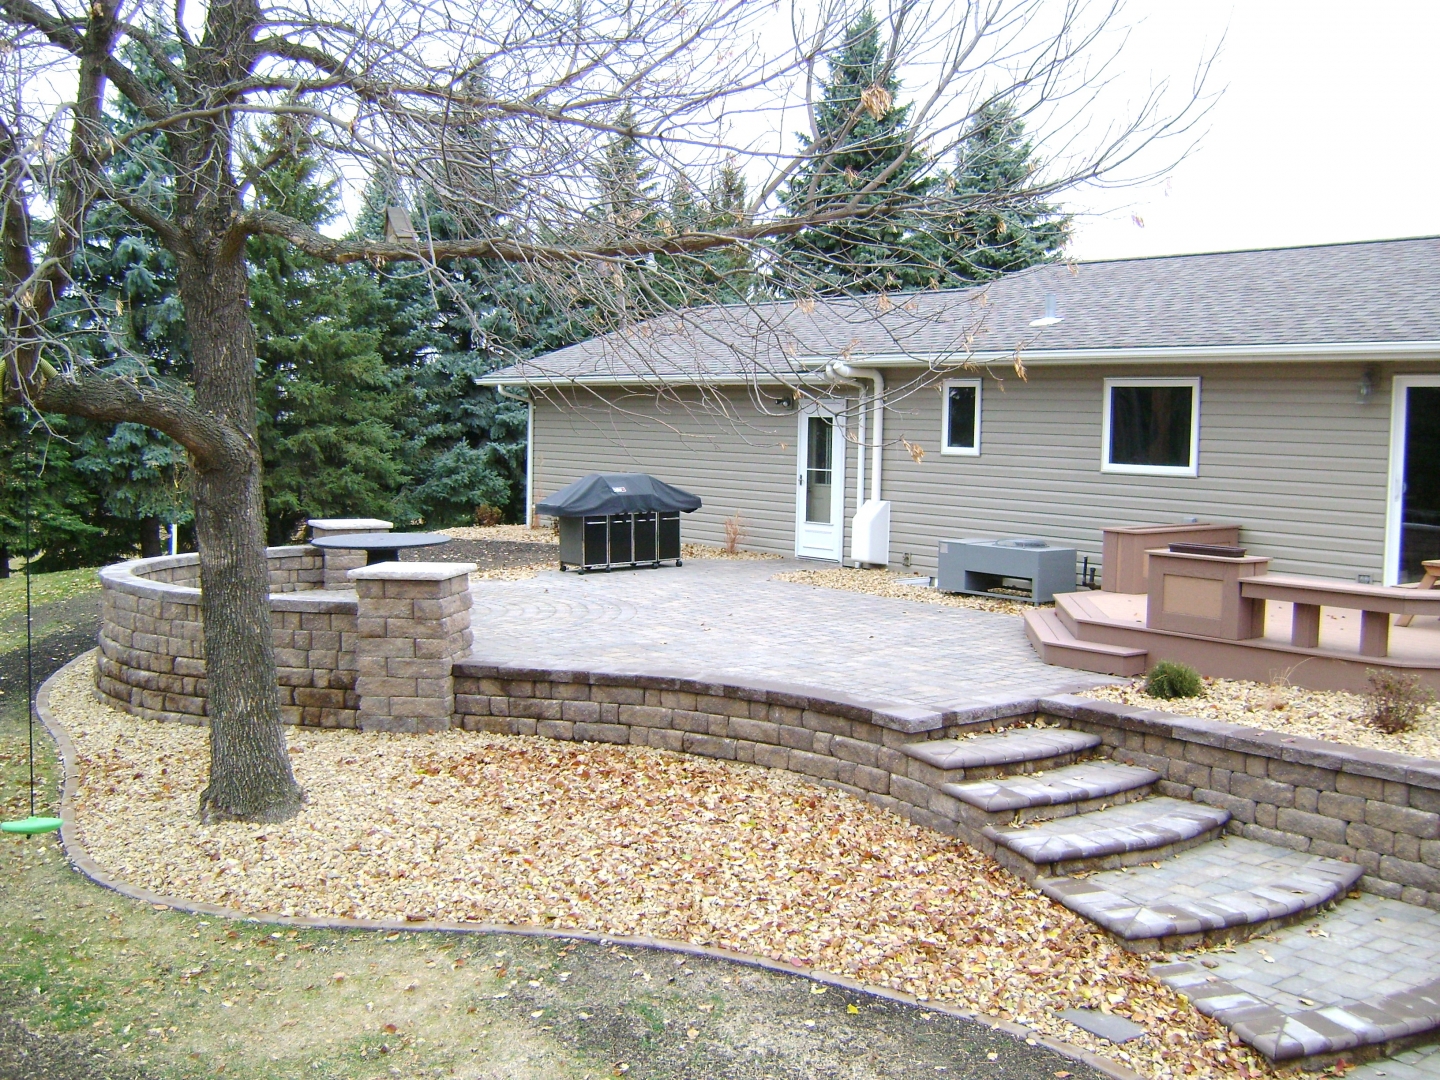 raised paver patio with retaining walls, stairs, deck, and seating wall